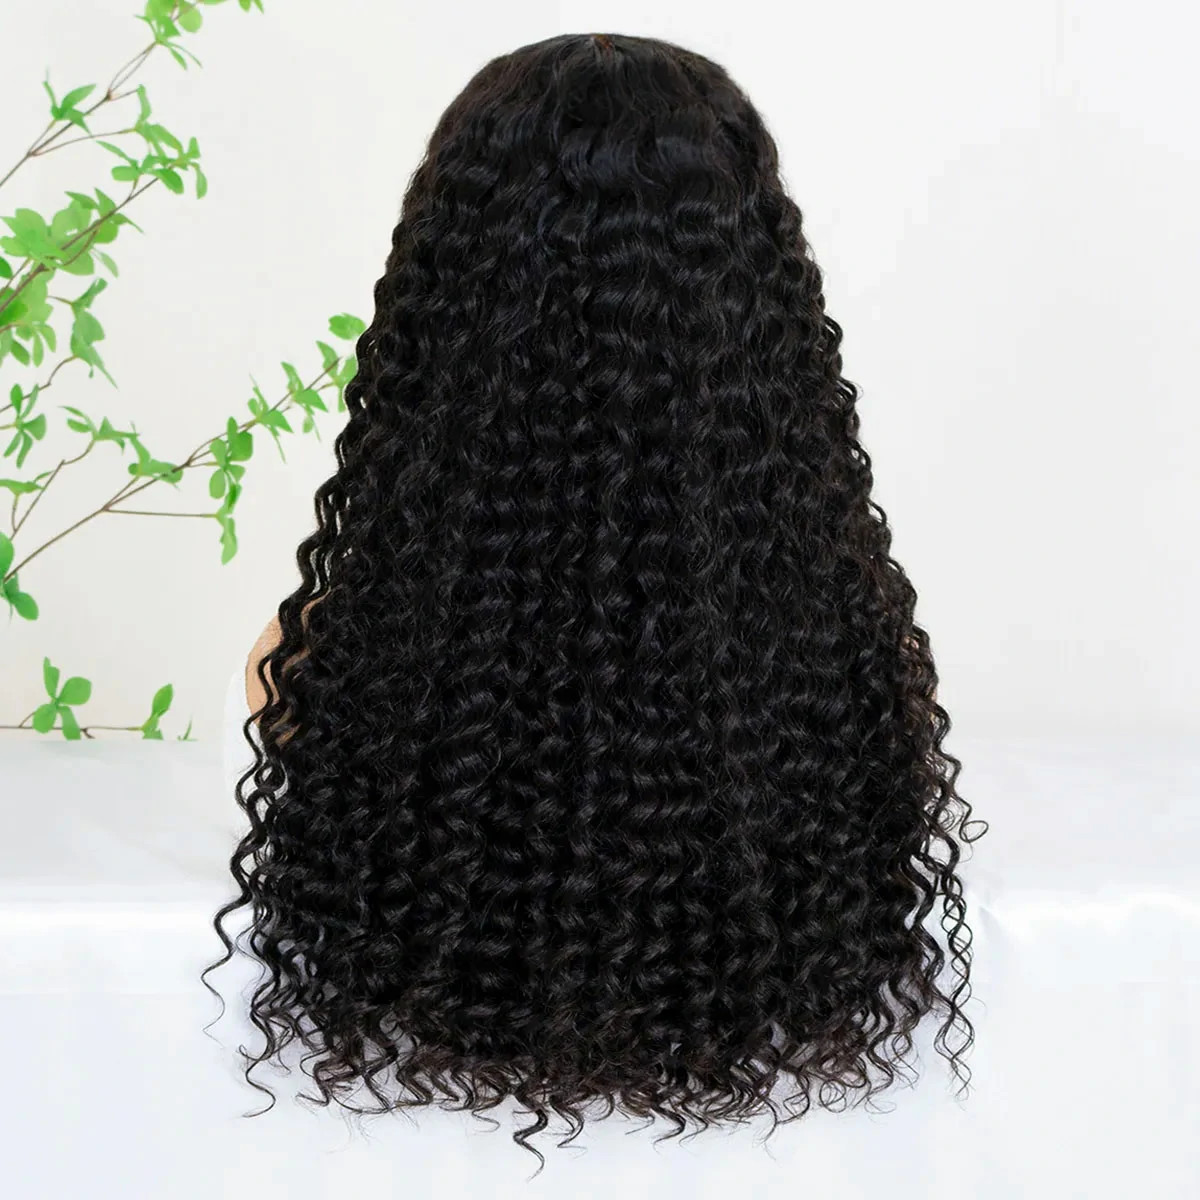 Curly Lace Front Wig Human Hair Wigs for Black Women HD Lace Front Wigs  Human Hair Pre Plucked 180% Density 4x4 Lace Closure Wigs Long Curly Wig